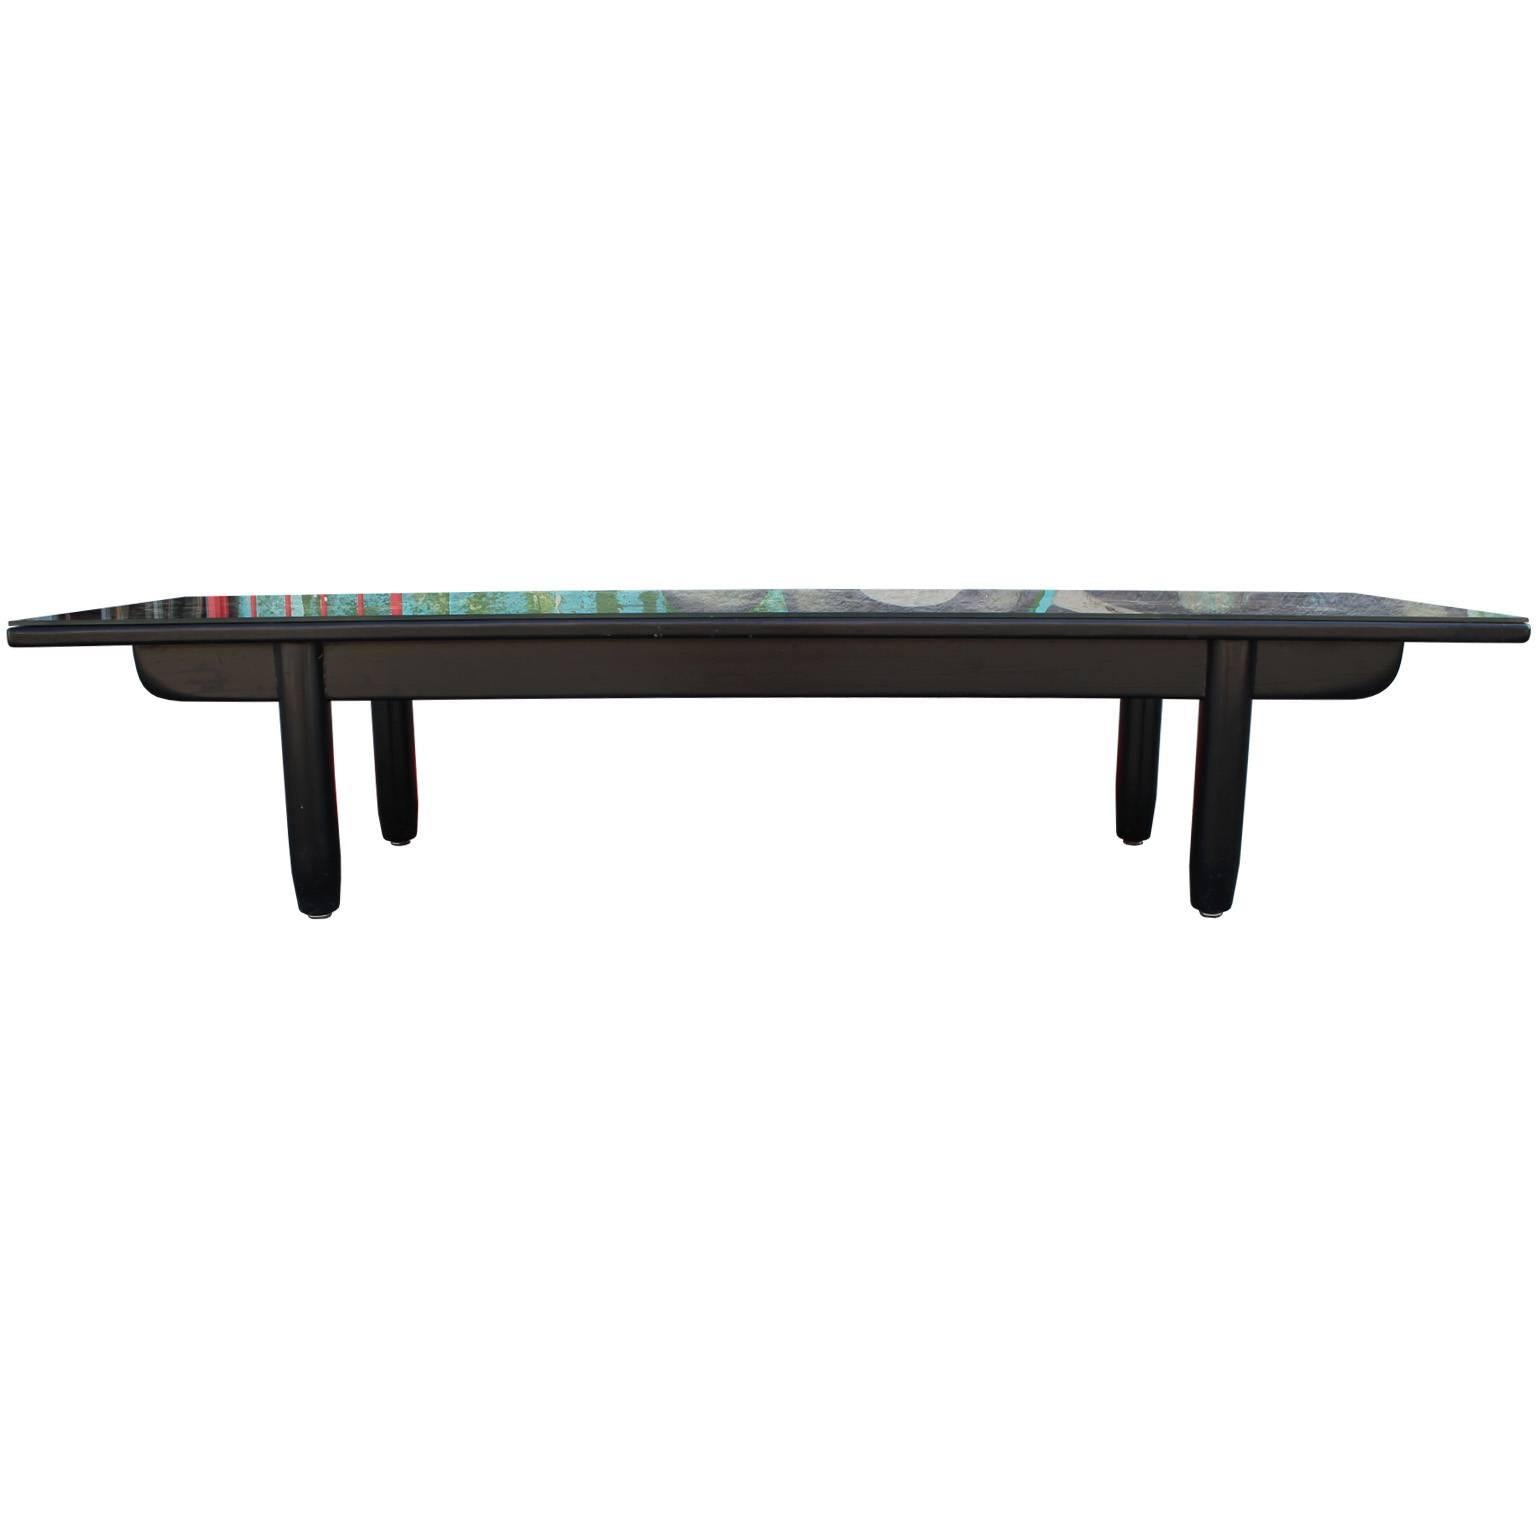 Incredible coffee table with a reverse painted glass top. Top has an incredible design and depicts a motif of horses and birds on an abstract gold leafed backdrop. Fabulous piece of art. Simple black legs complete the piece. Excellent focal point in